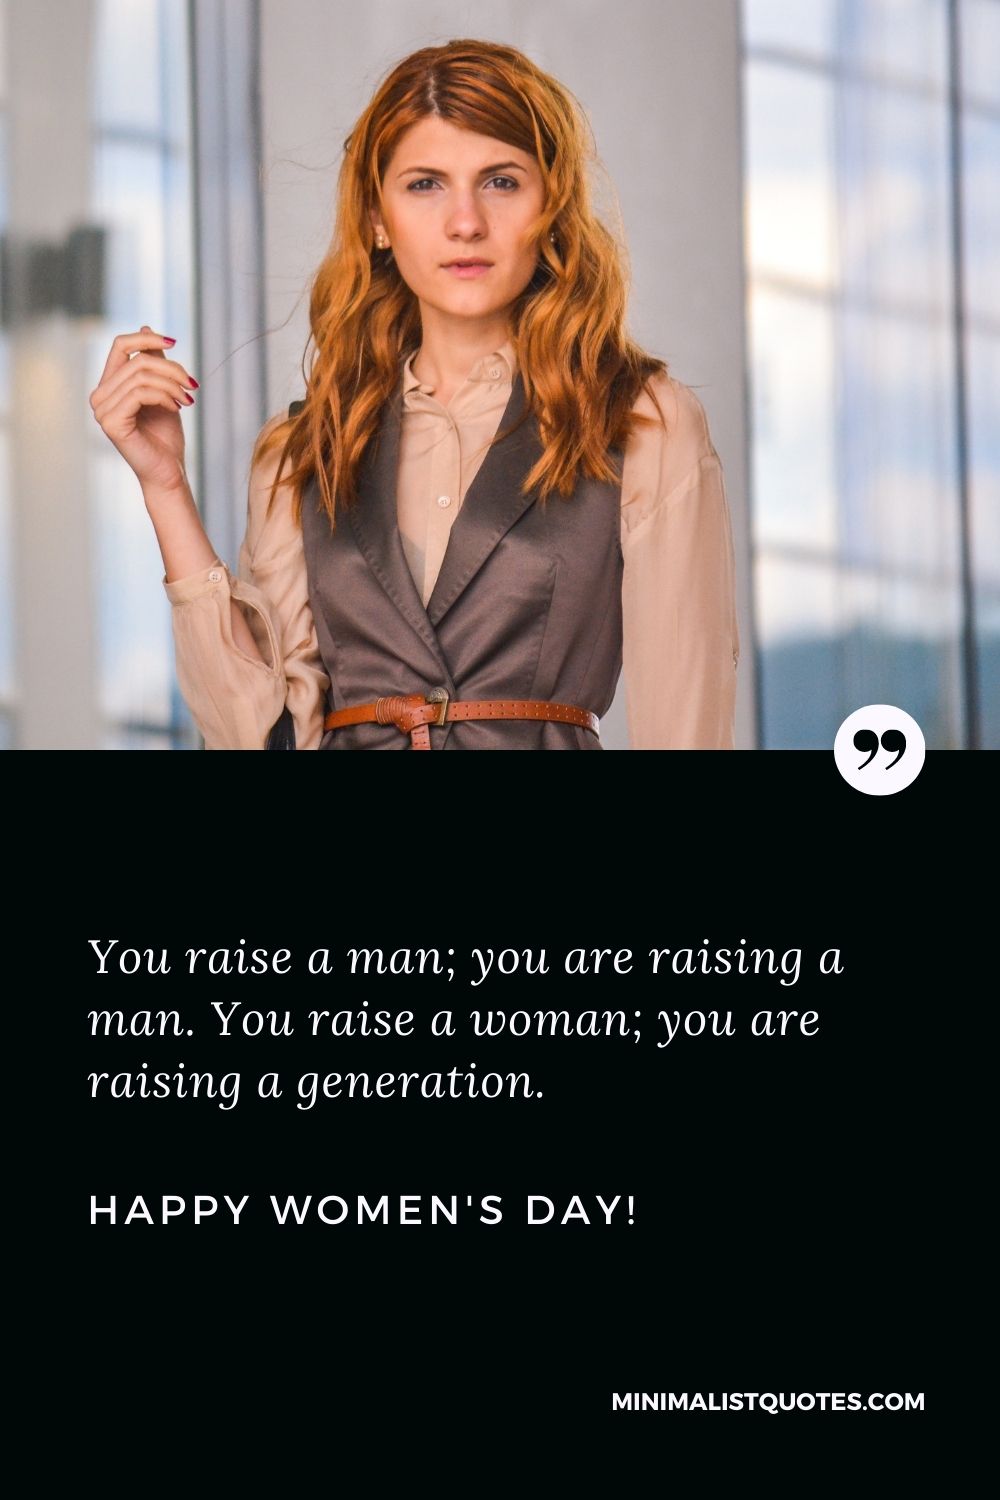 Message for international women's day: You educate a man; you are raising a man. You educate a woman; you are raising a generation. Happy Womens Day!